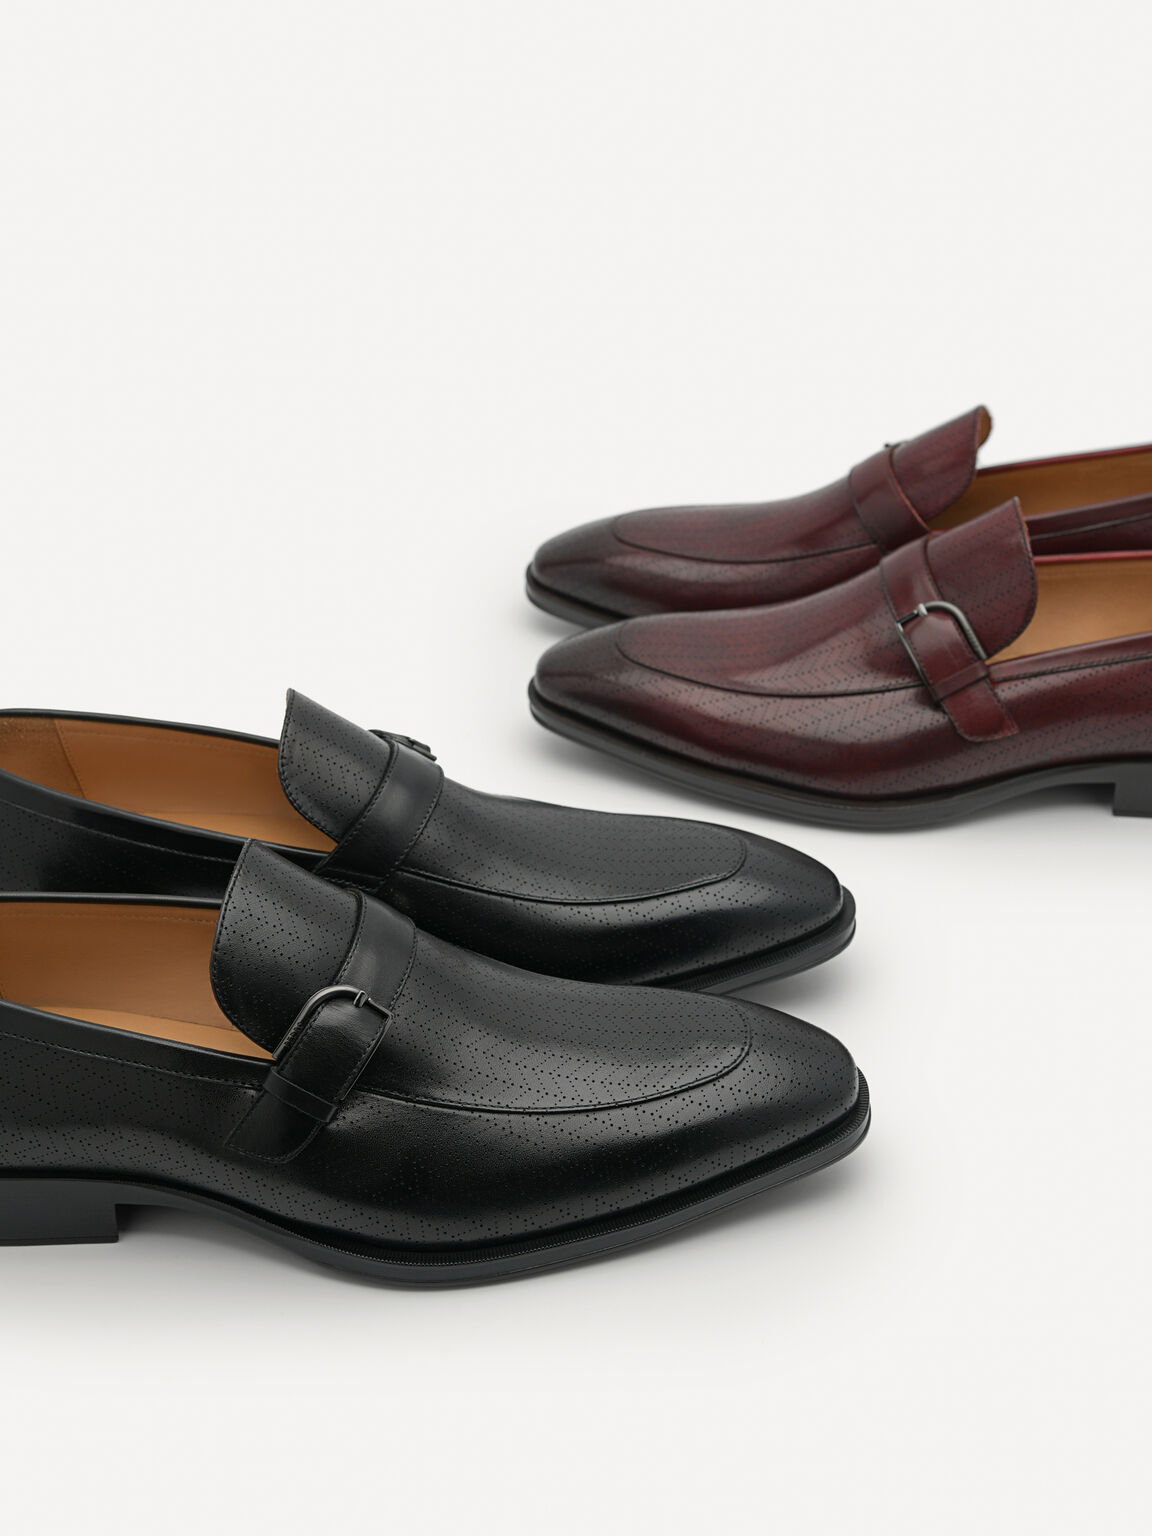 Leather Buckle Loafers, Maroon, hi-res